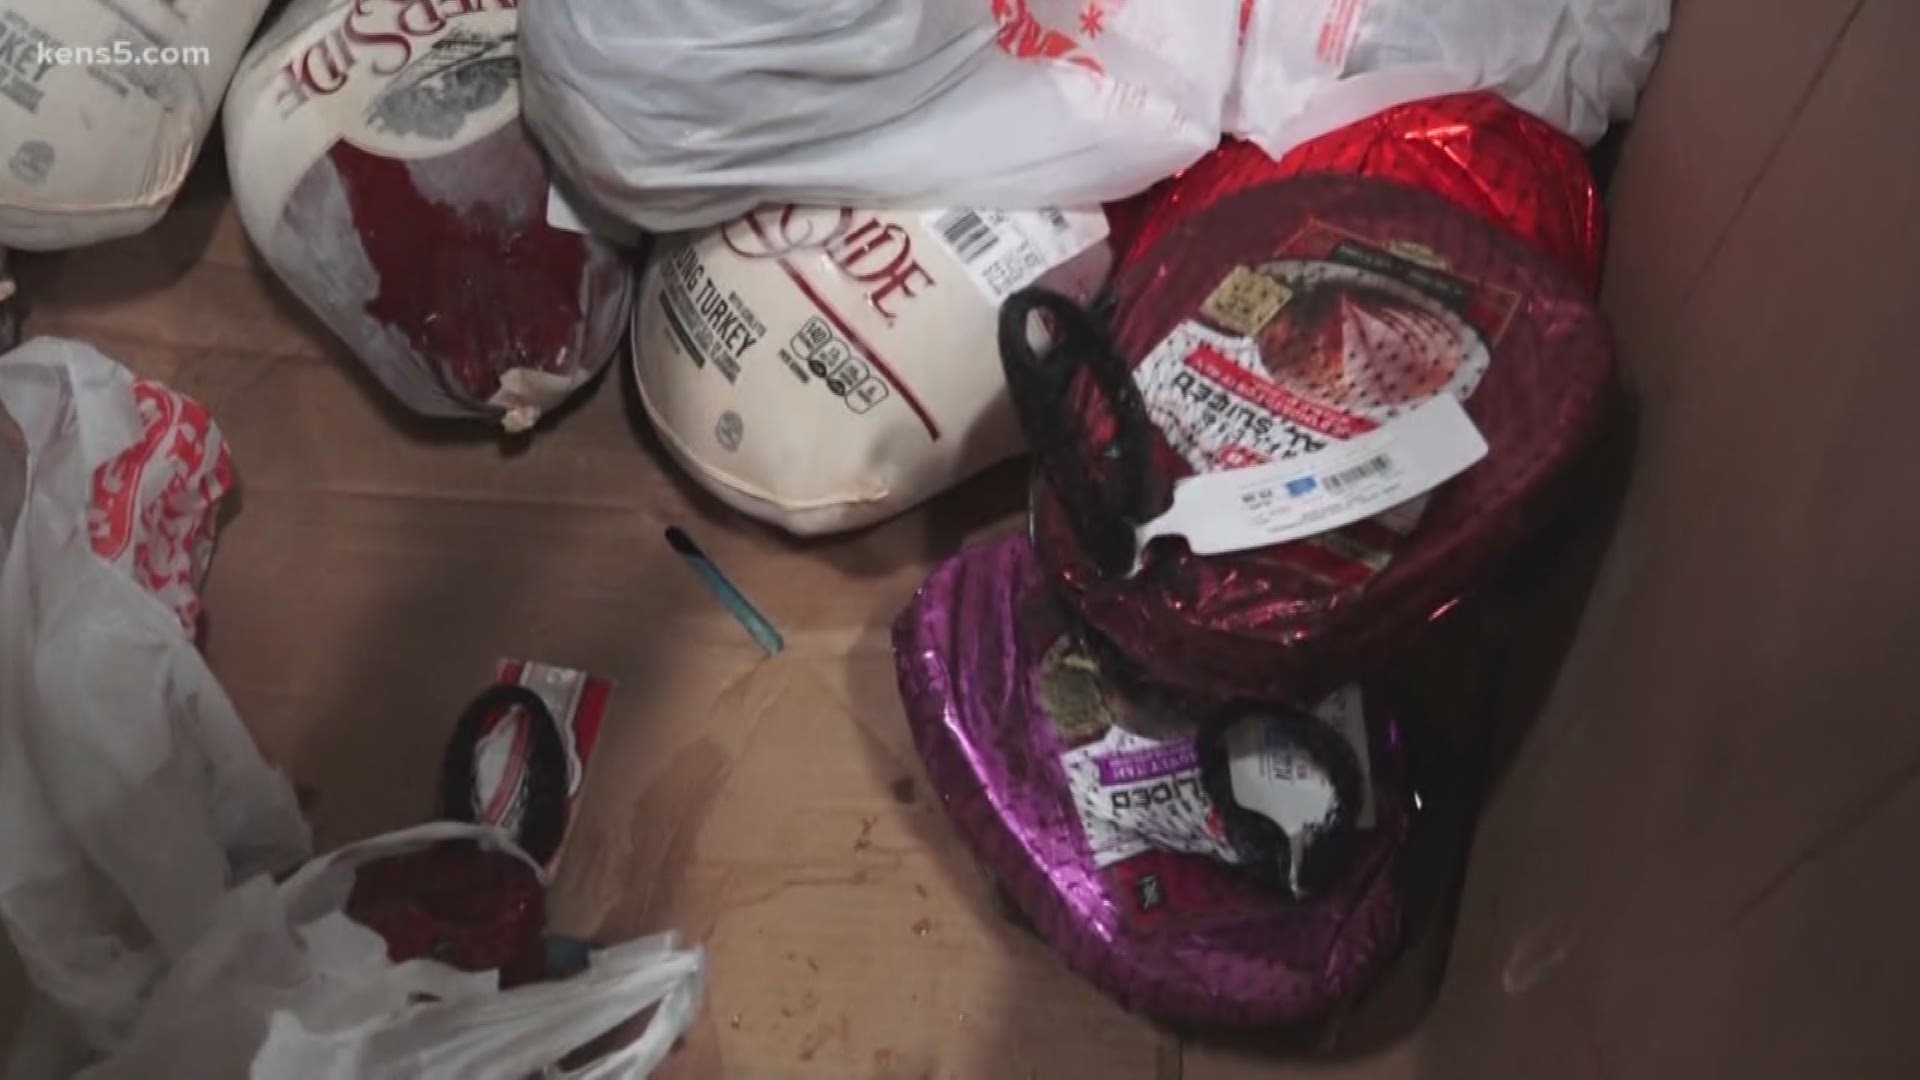 The San Antonio Food Bank is asking for donations of turkeys or money after what they are calling a "turkey shortage".